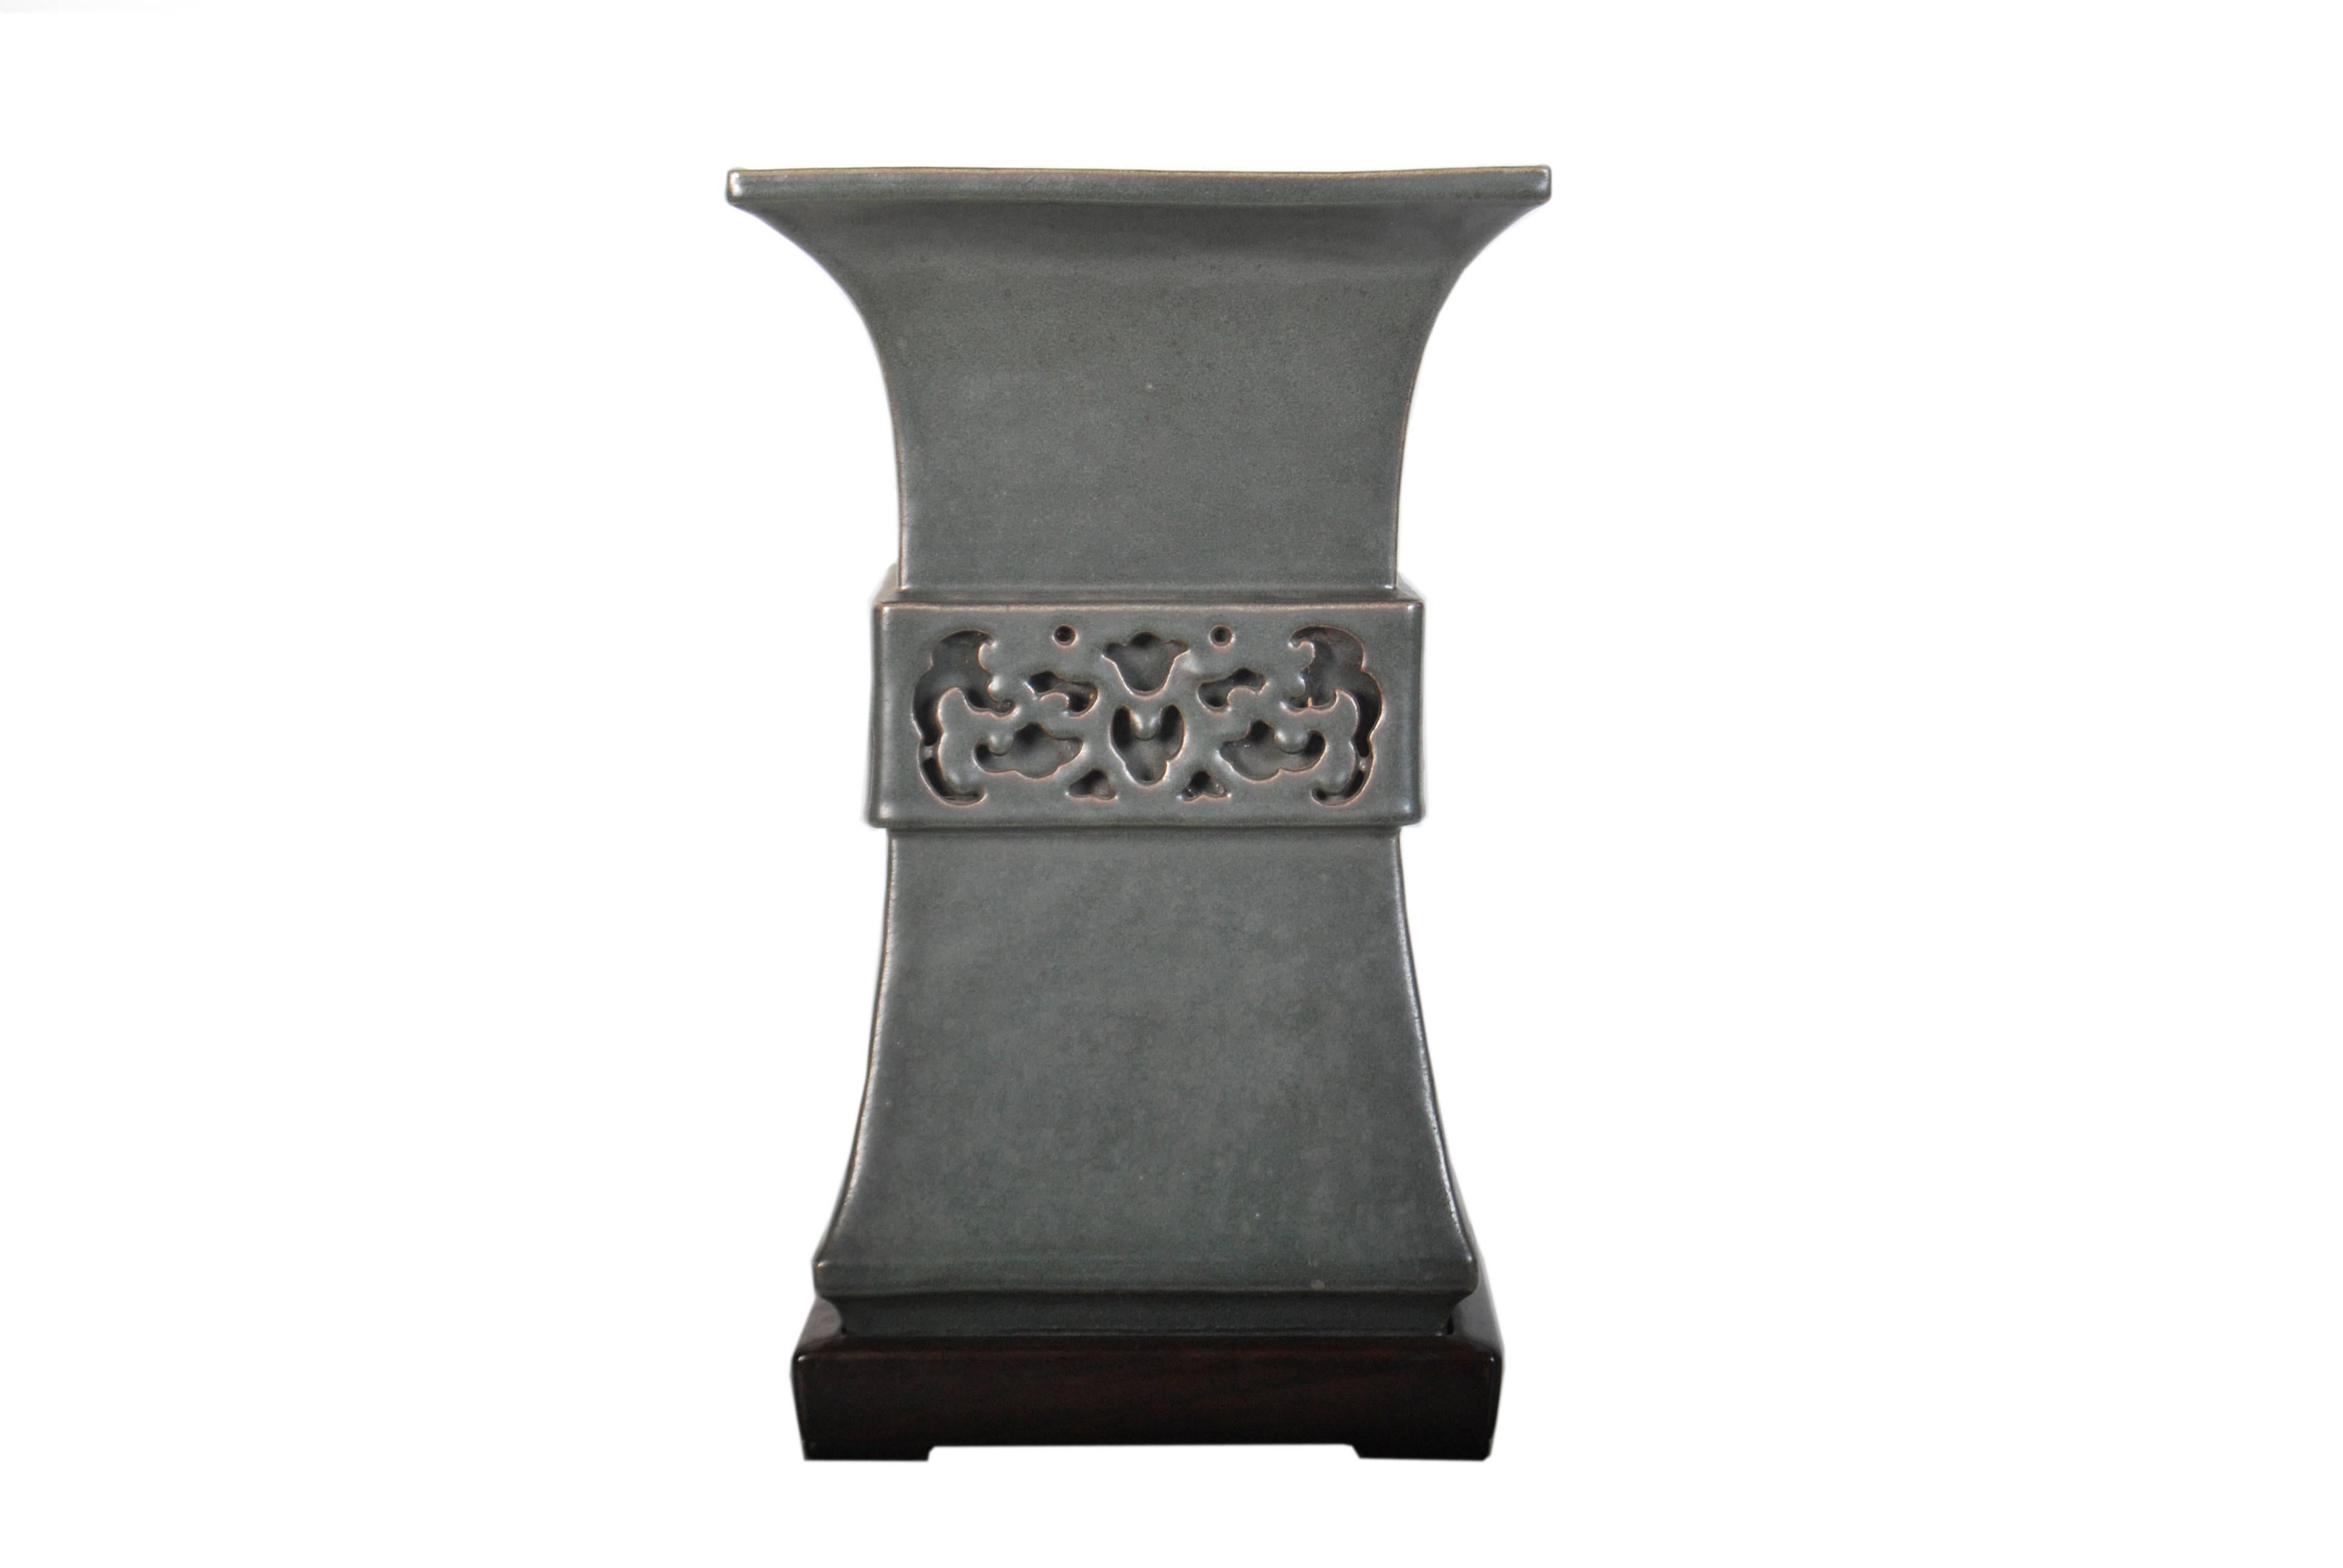 Large archaic Chinese style ceramic vase by Ito Tozan I (1846 - 1920) of elegant flaring form with a pierced double layered band around its midsection, glazed a dark metallic spinach green and with an accompanying fitted rosewood stand original to